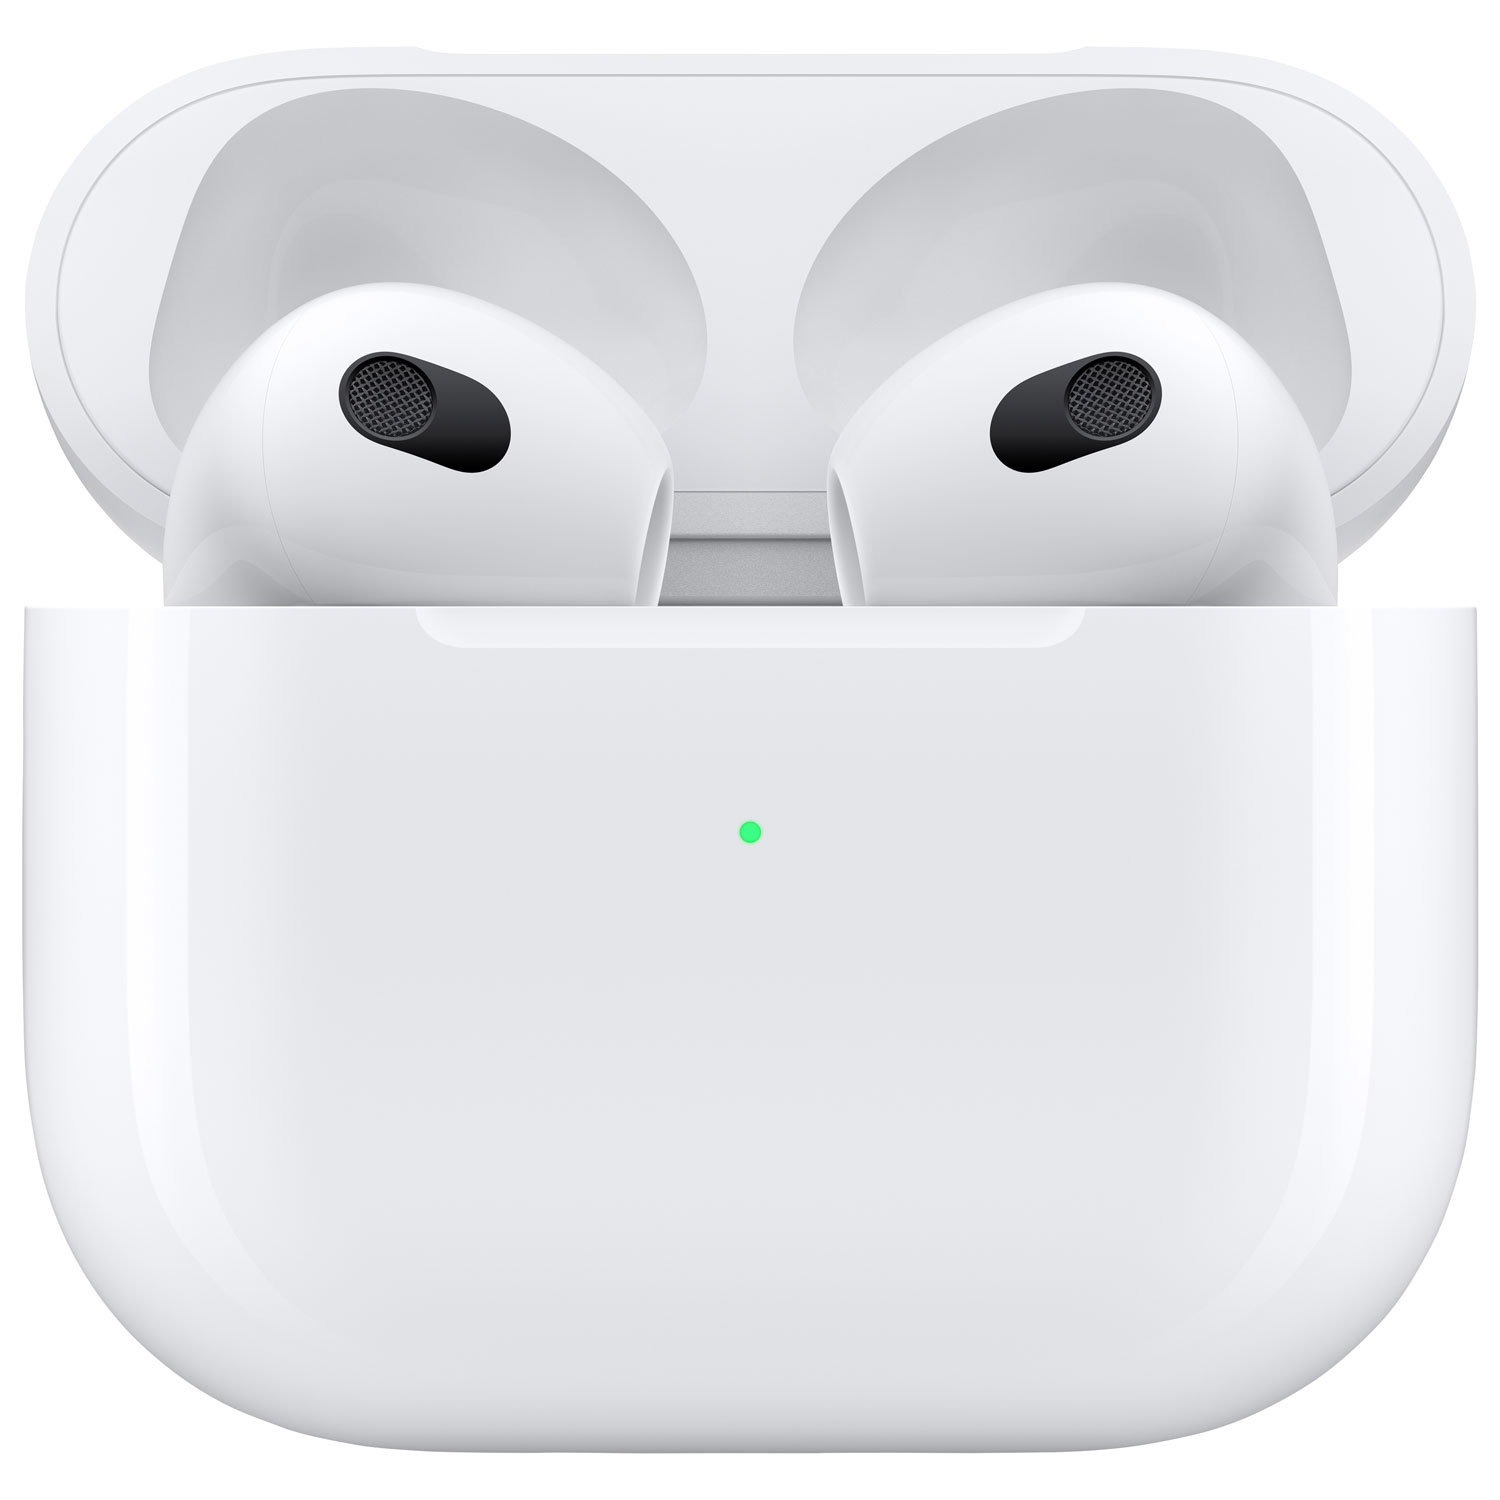 Apple AirPods In-Ear Truly Wireless Headphones (3rd Generation) with MagSafe Charging Case - White - Open Box